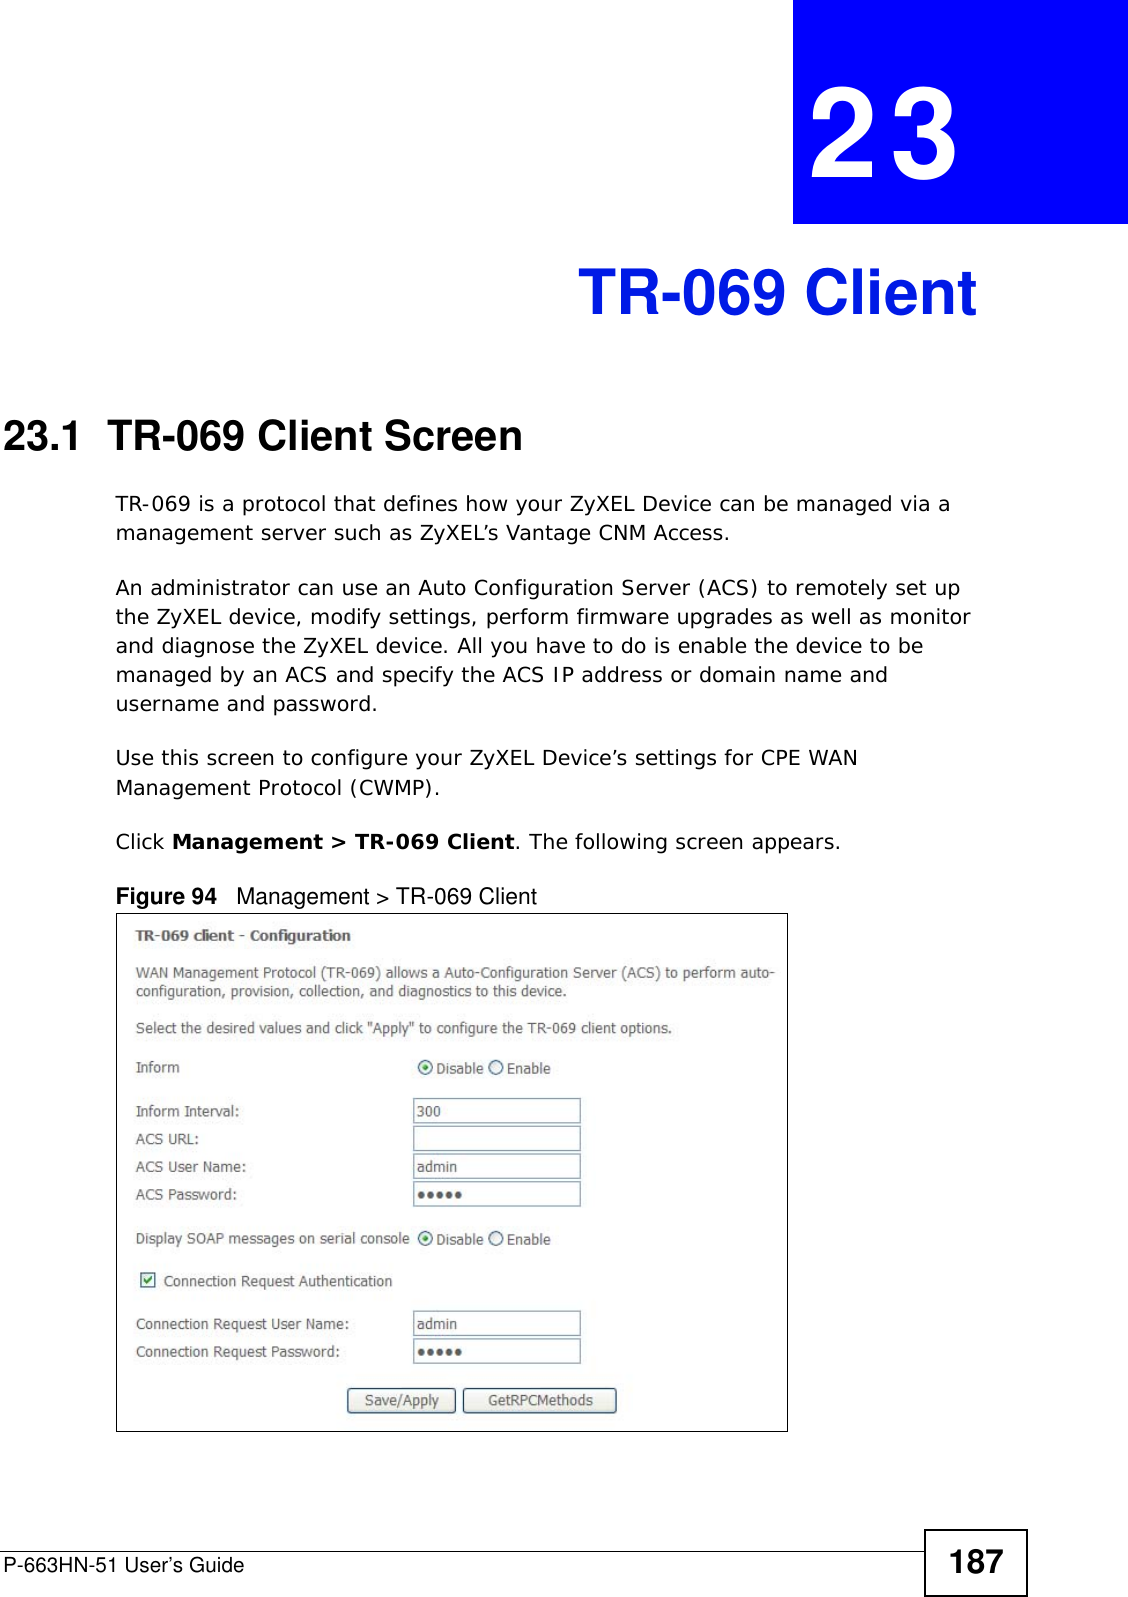 P-663HN-51 User’s Guide 187CHAPTER  23 TR-069 Client23.1  TR-069 Client ScreenTR-069 is a protocol that defines how your ZyXEL Device can be managed via a management server such as ZyXEL’s Vantage CNM Access. An administrator can use an Auto Configuration Server (ACS) to remotely set up the ZyXEL device, modify settings, perform firmware upgrades as well as monitor and diagnose the ZyXEL device. All you have to do is enable the device to be managed by an ACS and specify the ACS IP address or domain name and username and password.Use this screen to configure your ZyXEL Device’s settings for CPE WAN Management Protocol (CWMP).Click Management &gt; TR-069 Client. The following screen appears.Figure 94   Management &gt; TR-069 Client 